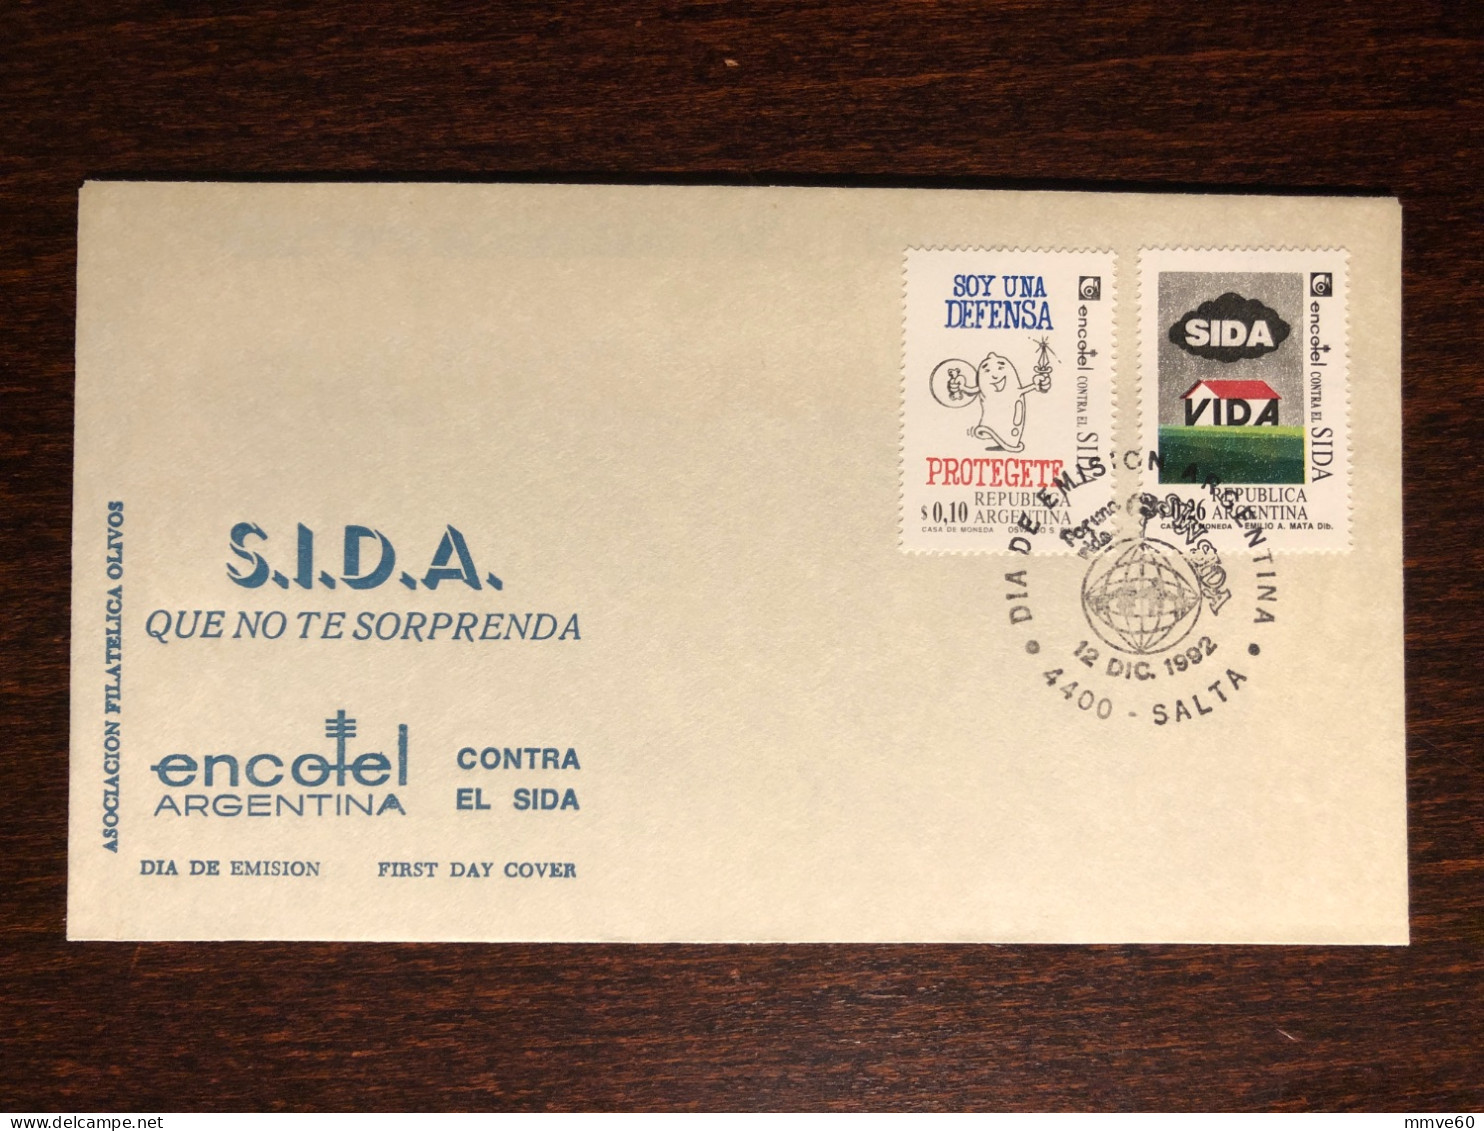 ARGENTINA FDC COVER 1992 YEAR AIDS SIDA HEALTH MEDICINE STAMPS - FDC